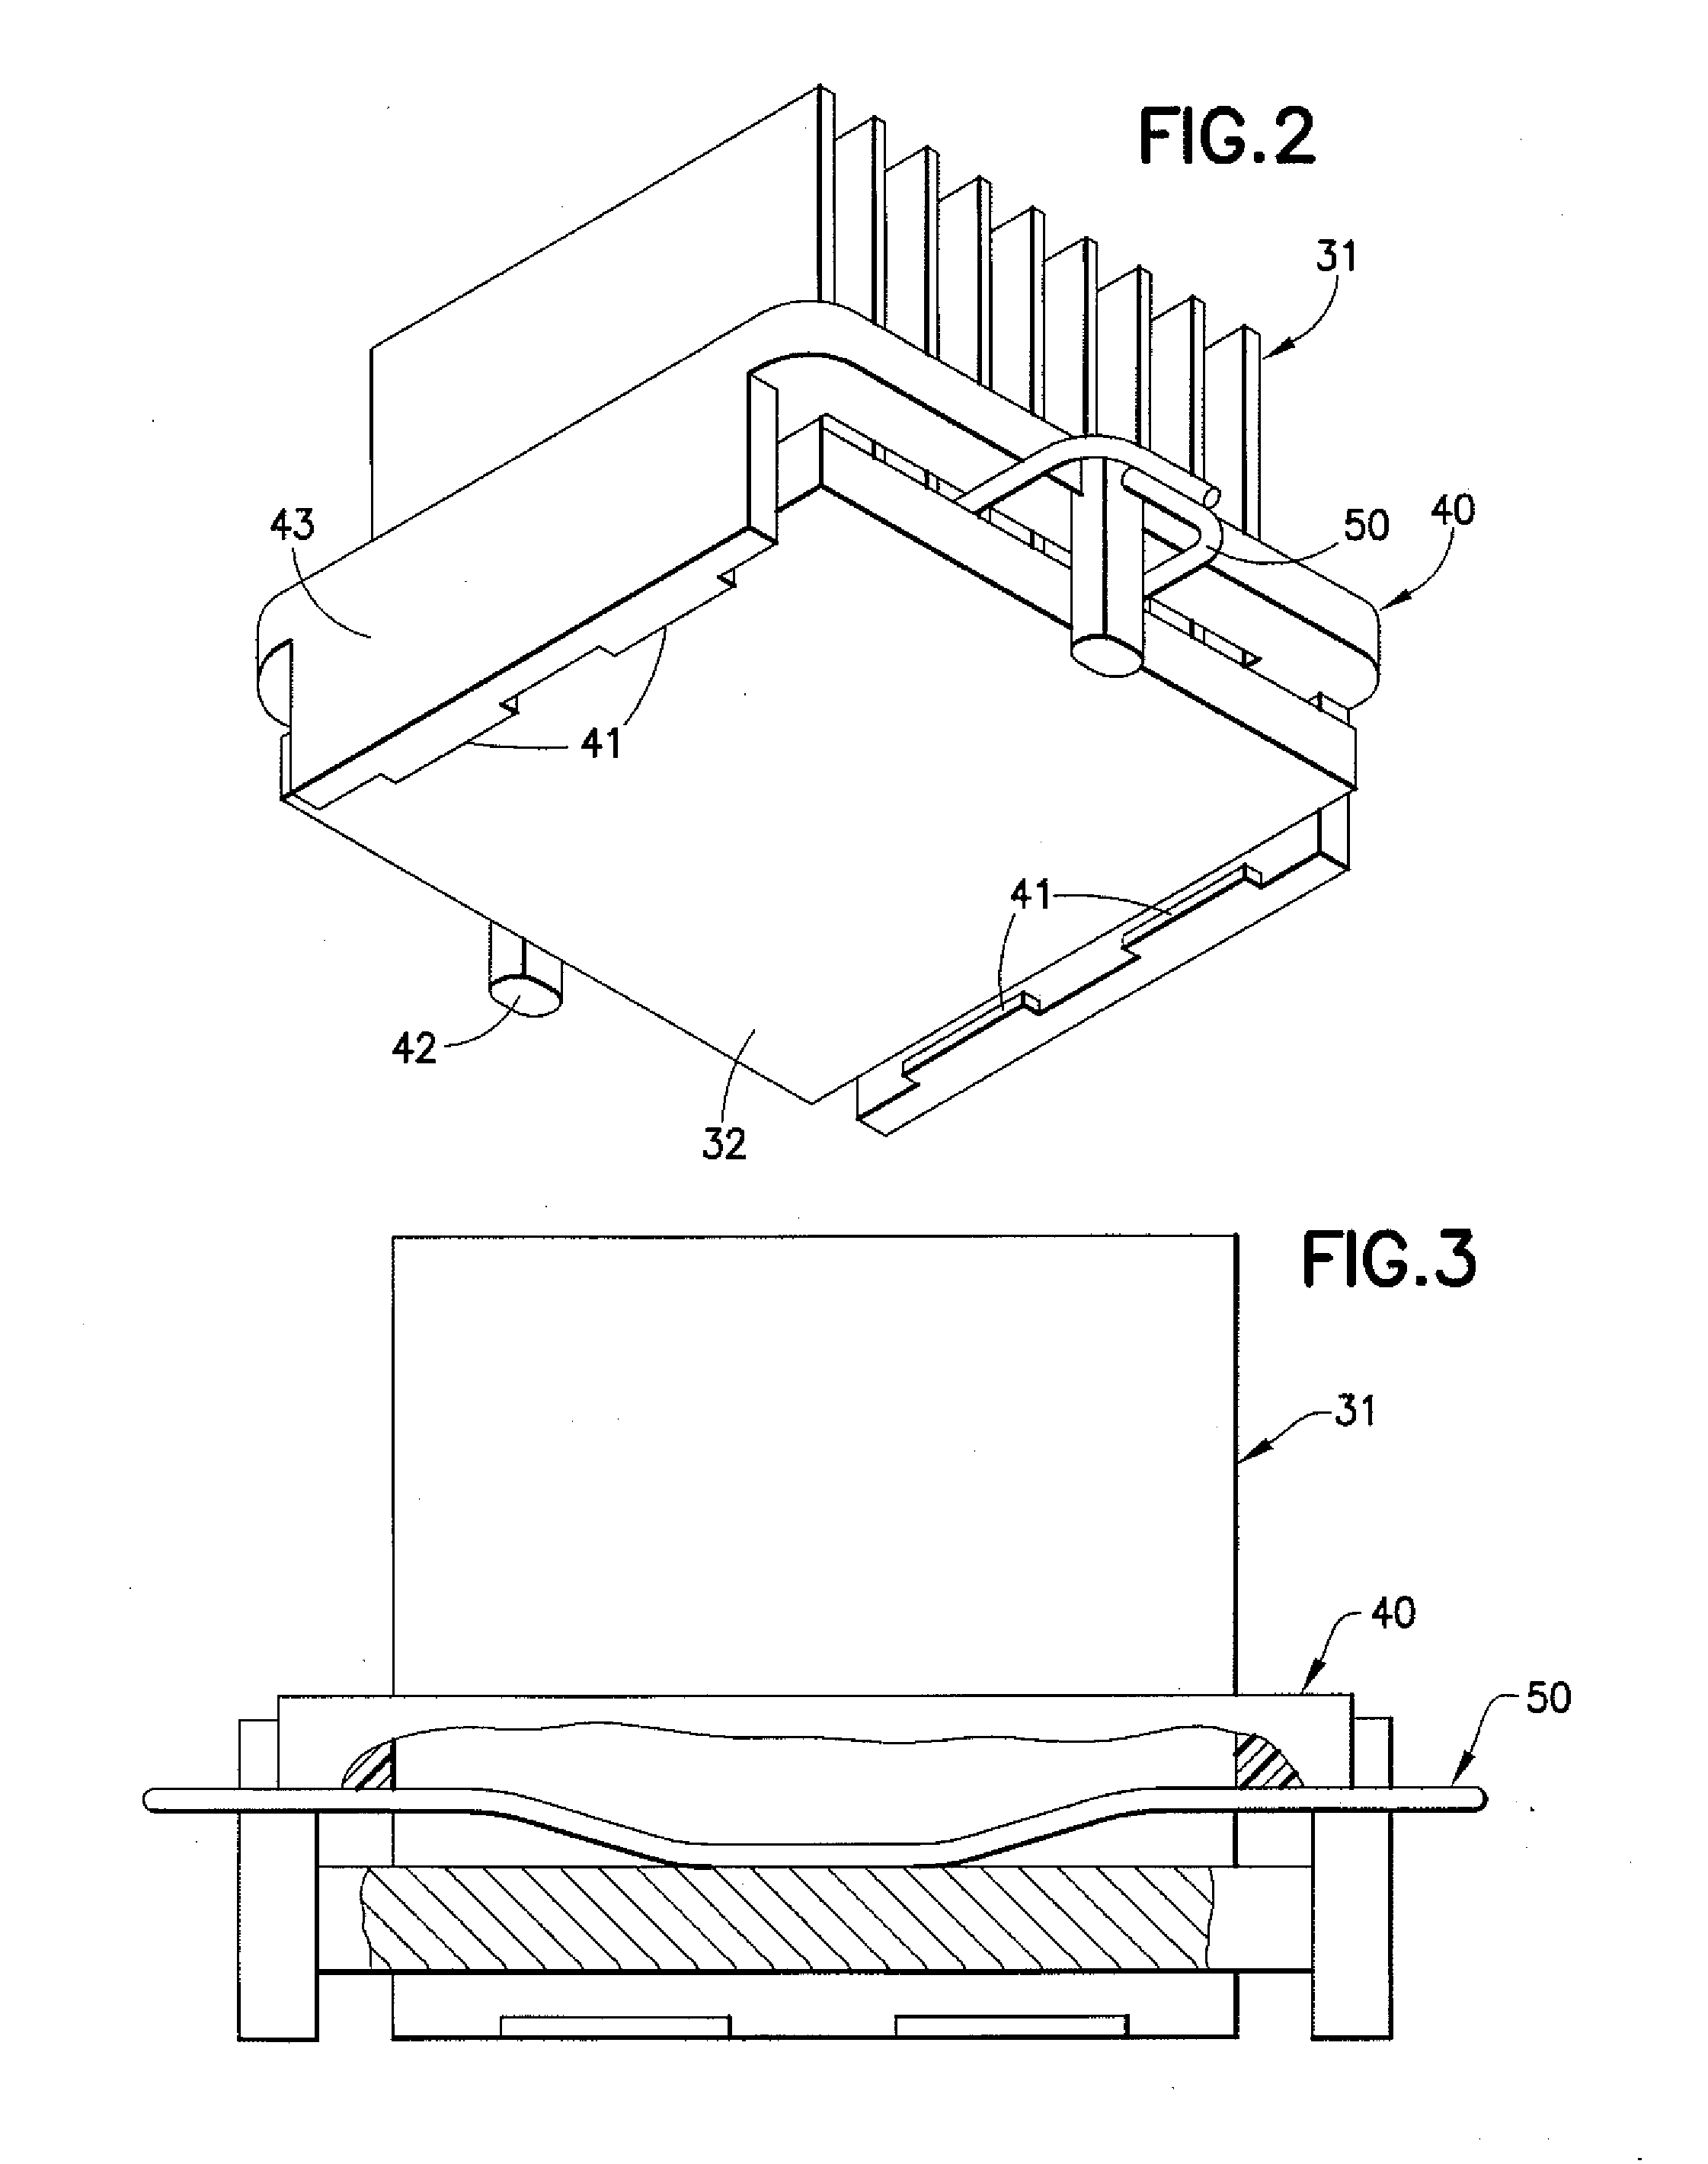 Heat Sink Mount and Assembly